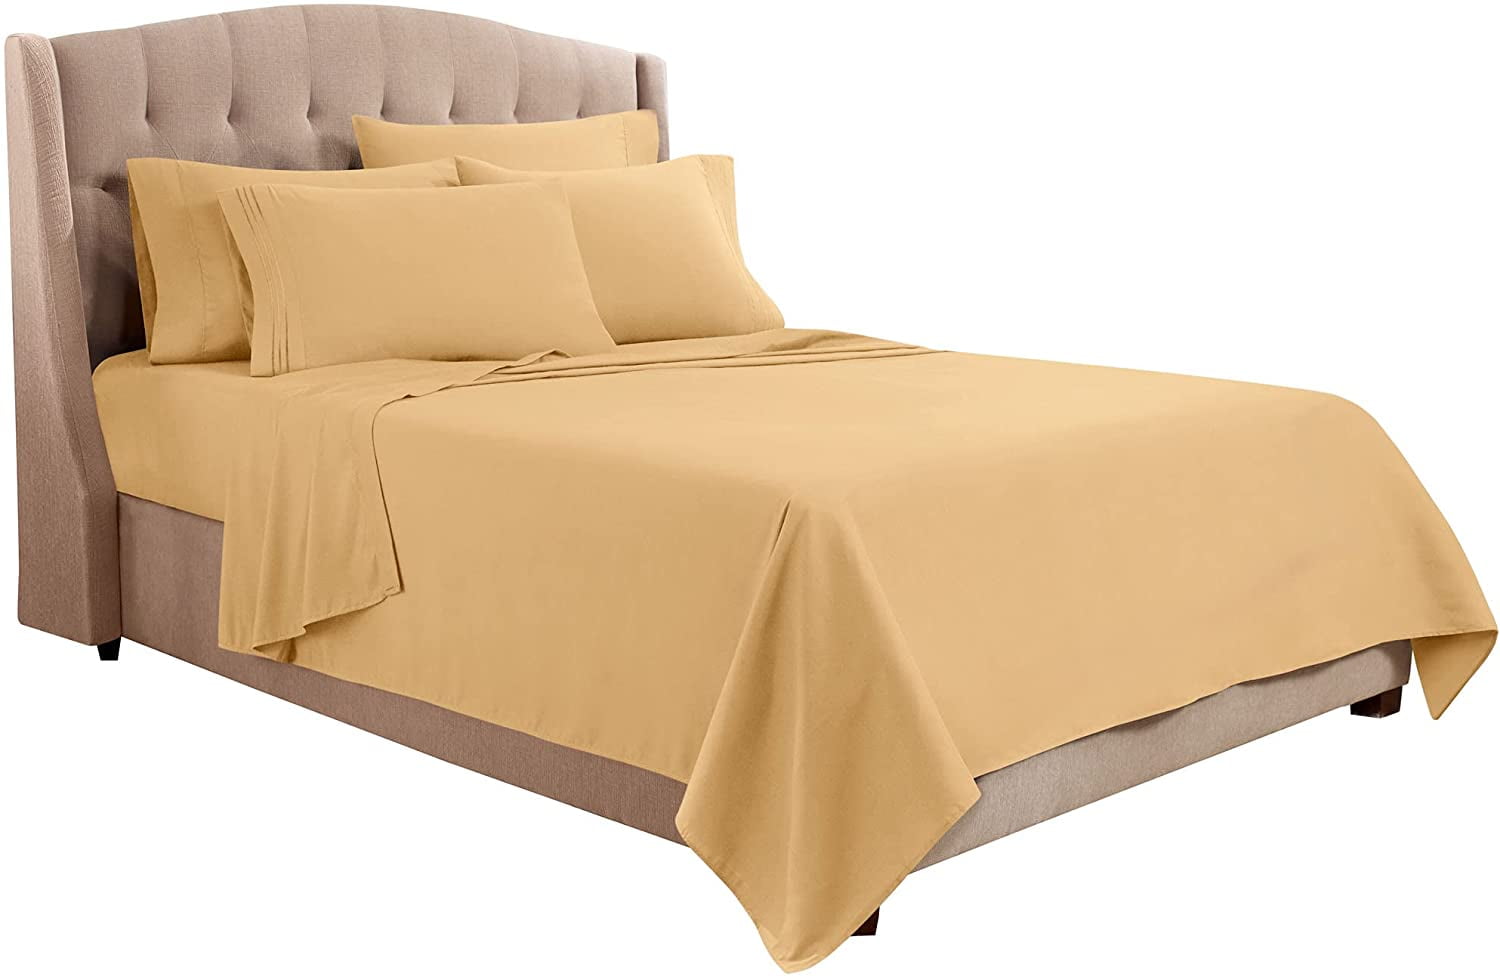 1000 Thread Count Egyptian Cotton Superior Bedding Item All US Sizes Beige Solid 